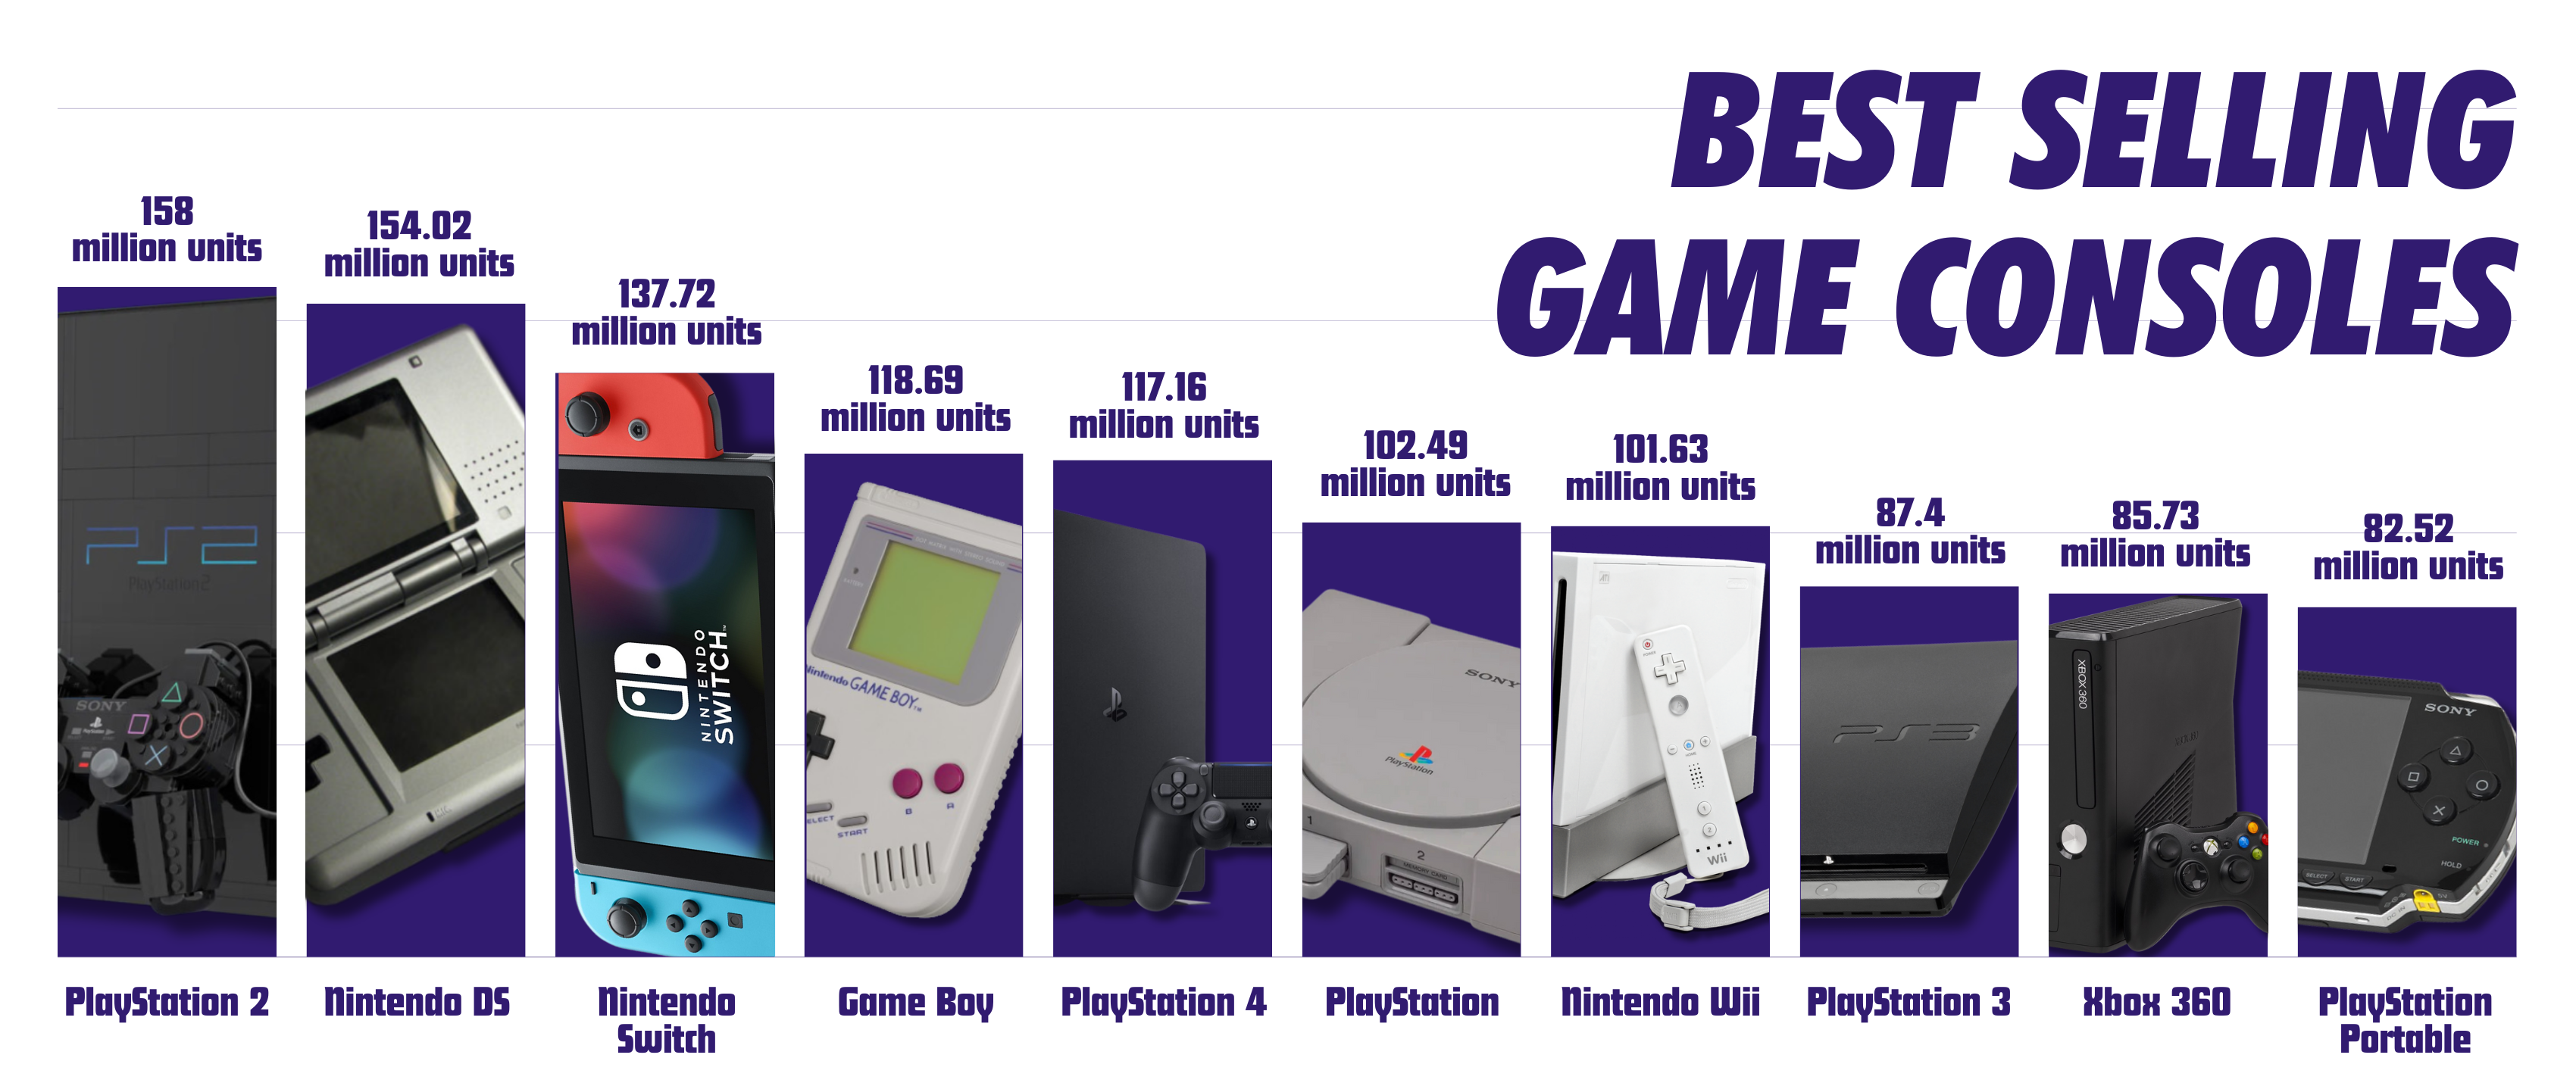 Best Selling Game Consoles of All Time
